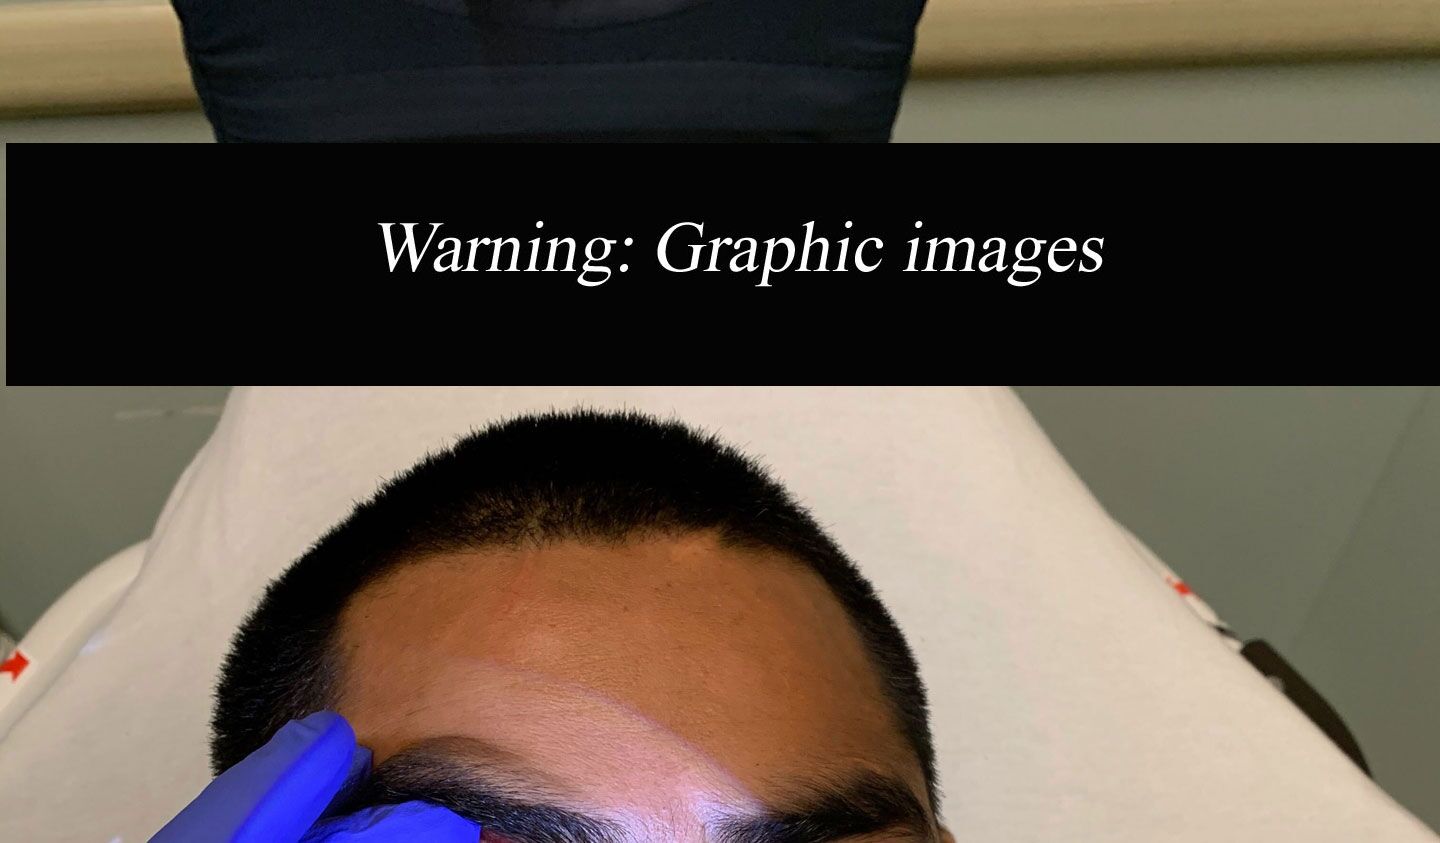 Warning to our readers: Graphic images